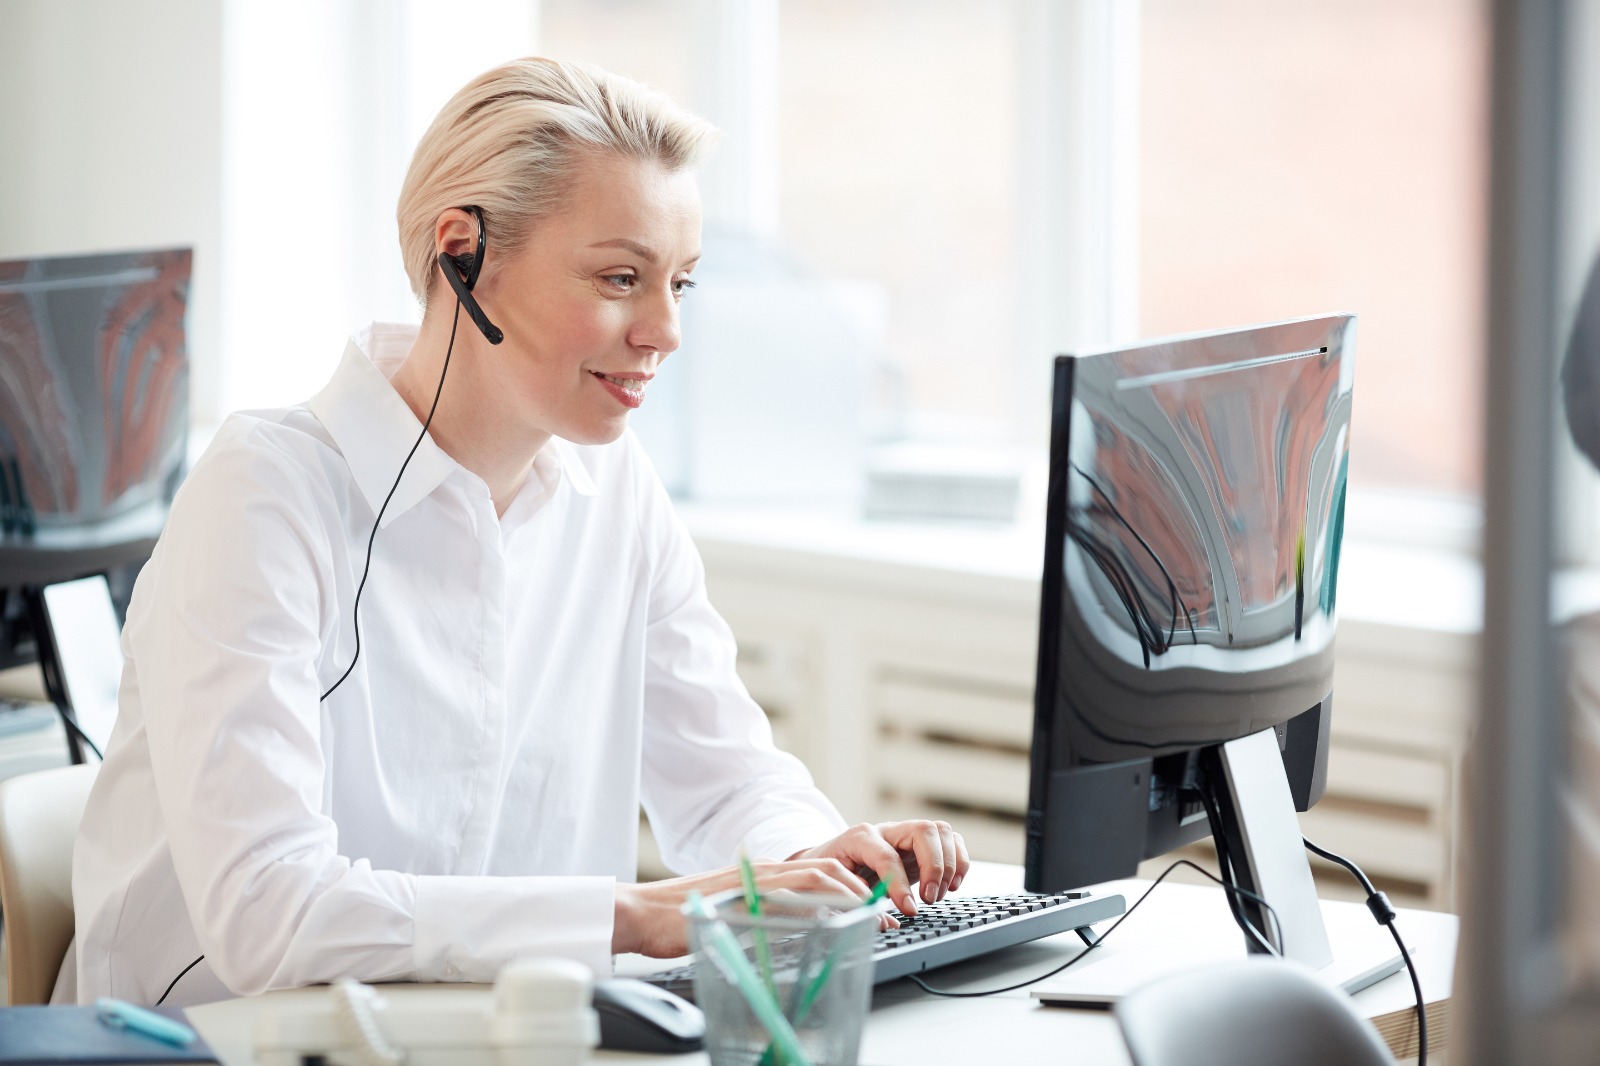 Introducing Zoom Contact Center: Why Is It More Popular?